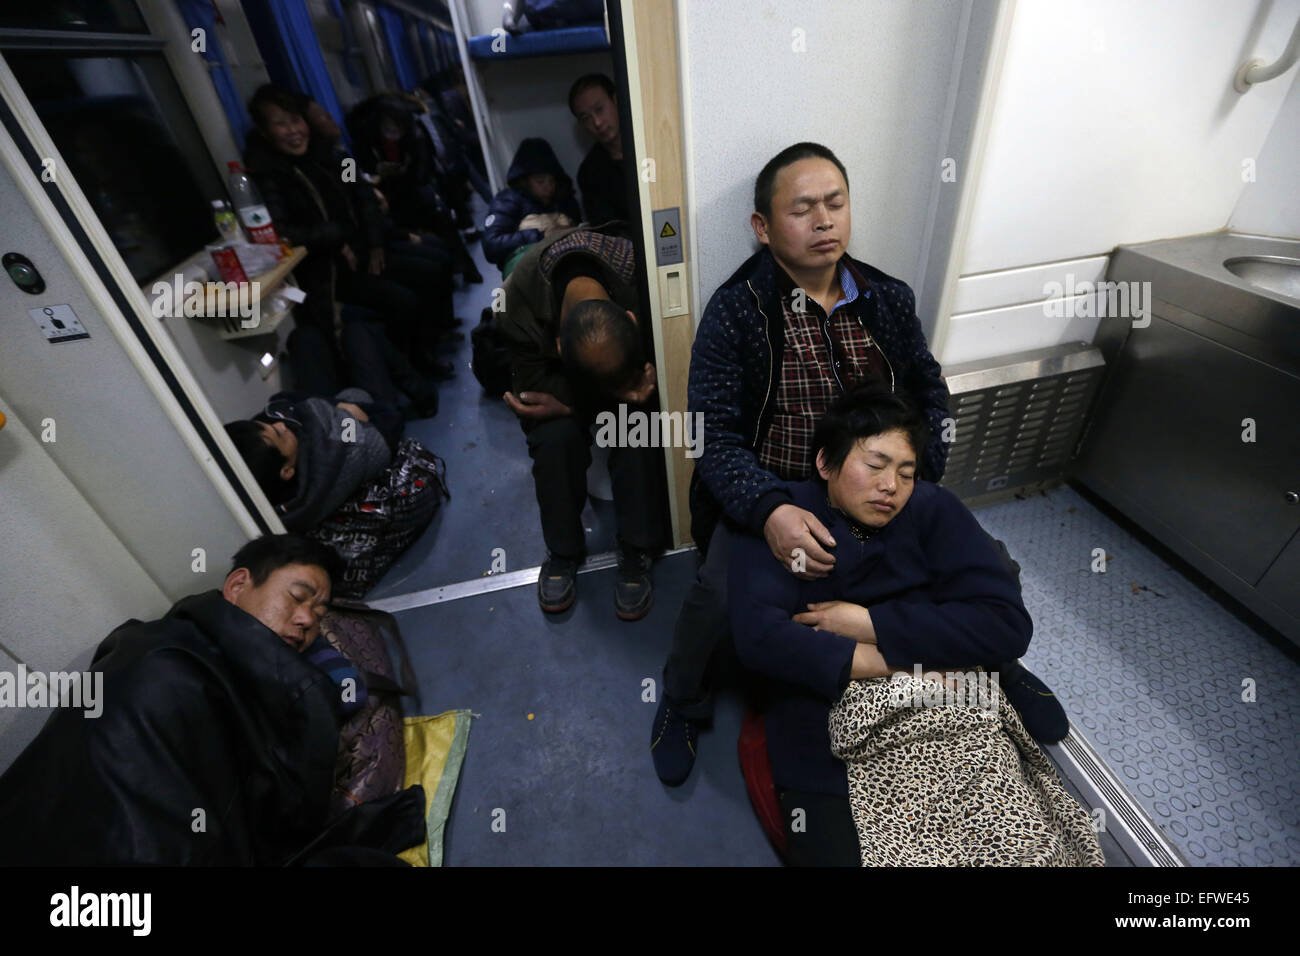 Shanghai, China's Sichuan Province. 9th Sep, 2015. Passengers have a sleep on the ground of train 3663, which runs from east China's Shanghai to Chengdu, capital of southwest China's Sichuan Province, on Sept. 9, 2015. The Spring Festival, or the Chinese lunar New Year which starts from Feb. 19 this year, is known as the world's biggest migration, with millions of people traveling vast distances for family reunions. © Ding Ting/Xinhua/Alamy Live News Stock Photo